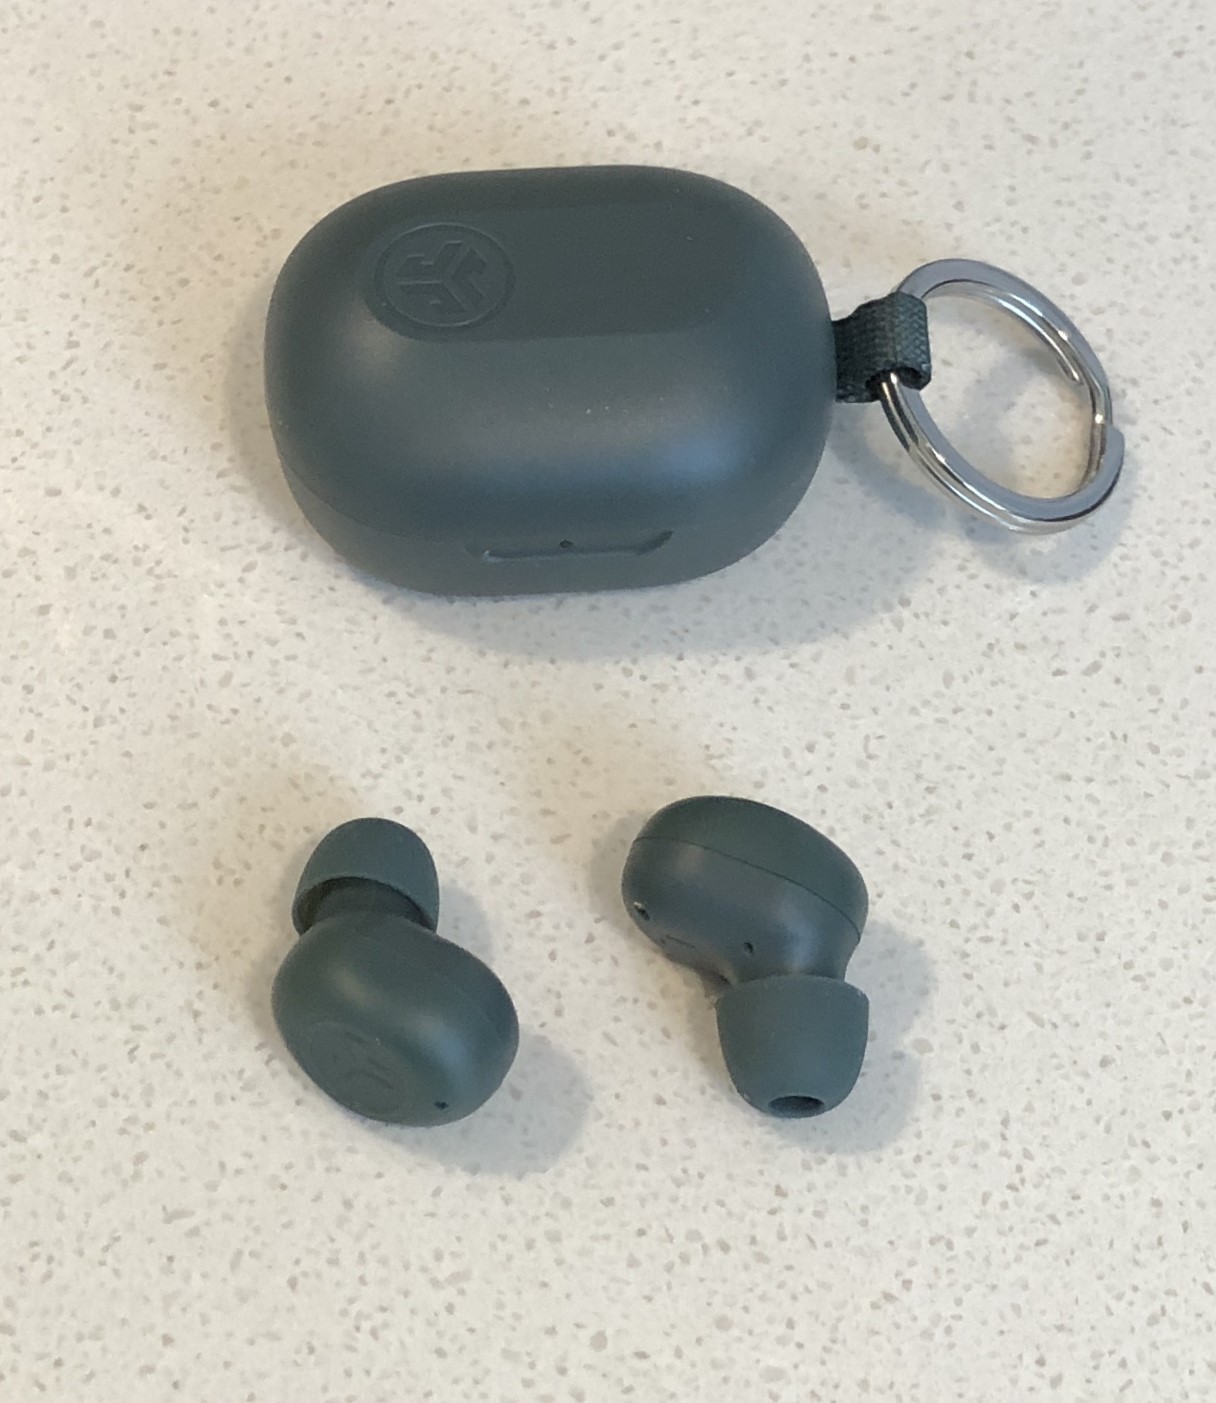 JLab JBuds Mini wireless earbuds and charging case